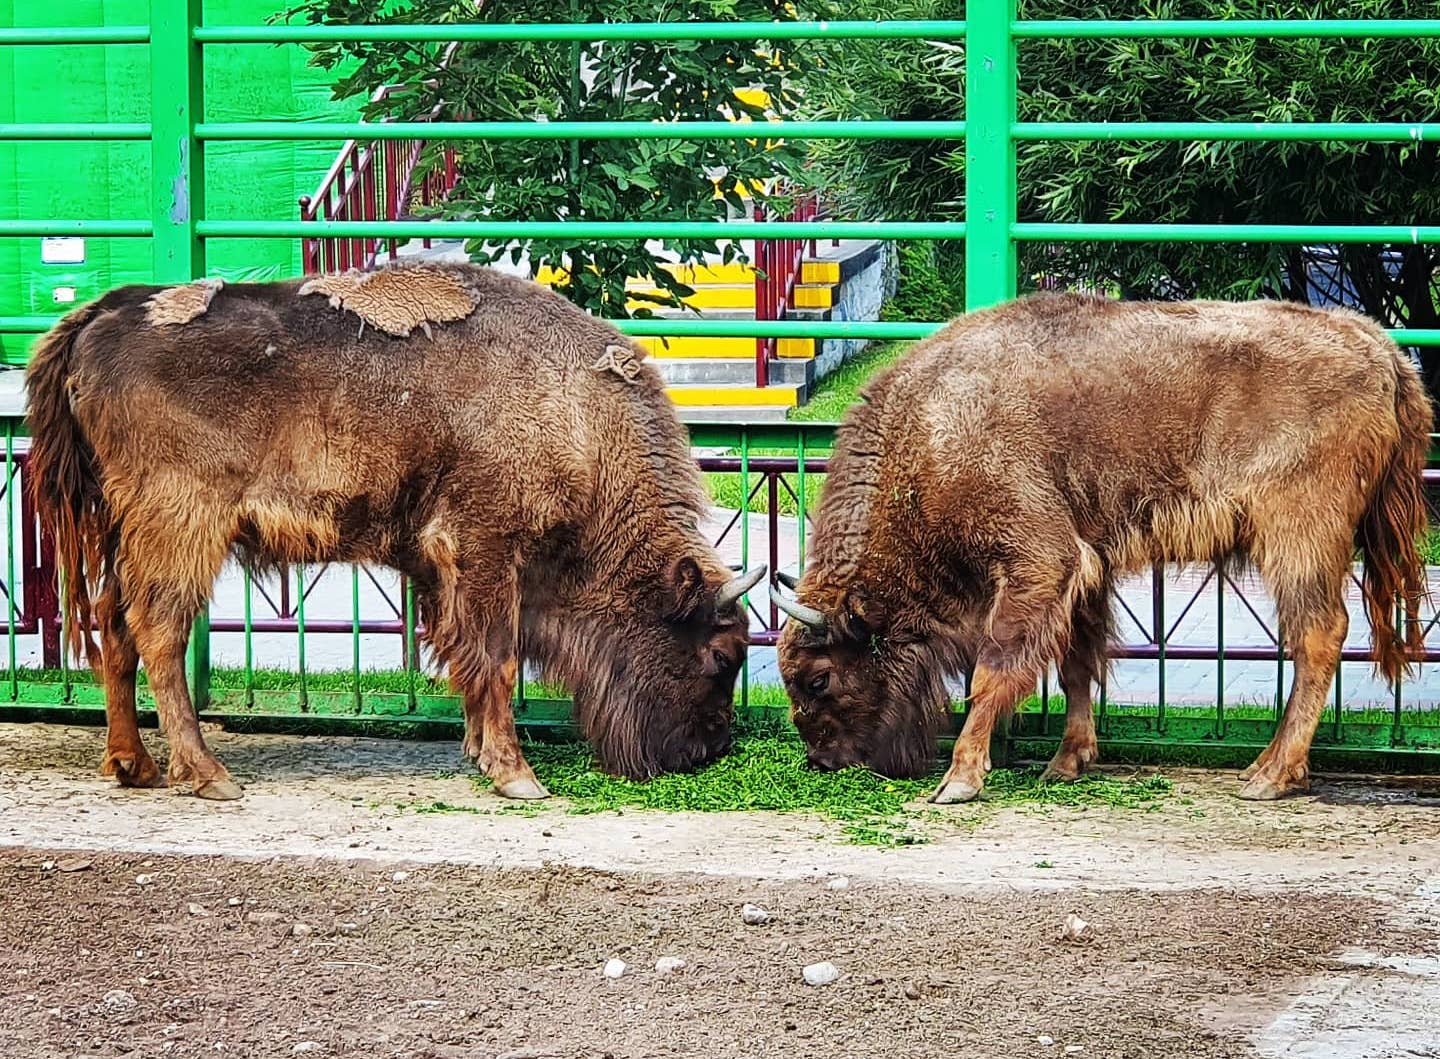 Bison in the Grodno Zoo. Summer 2020 Photo by A.Basak